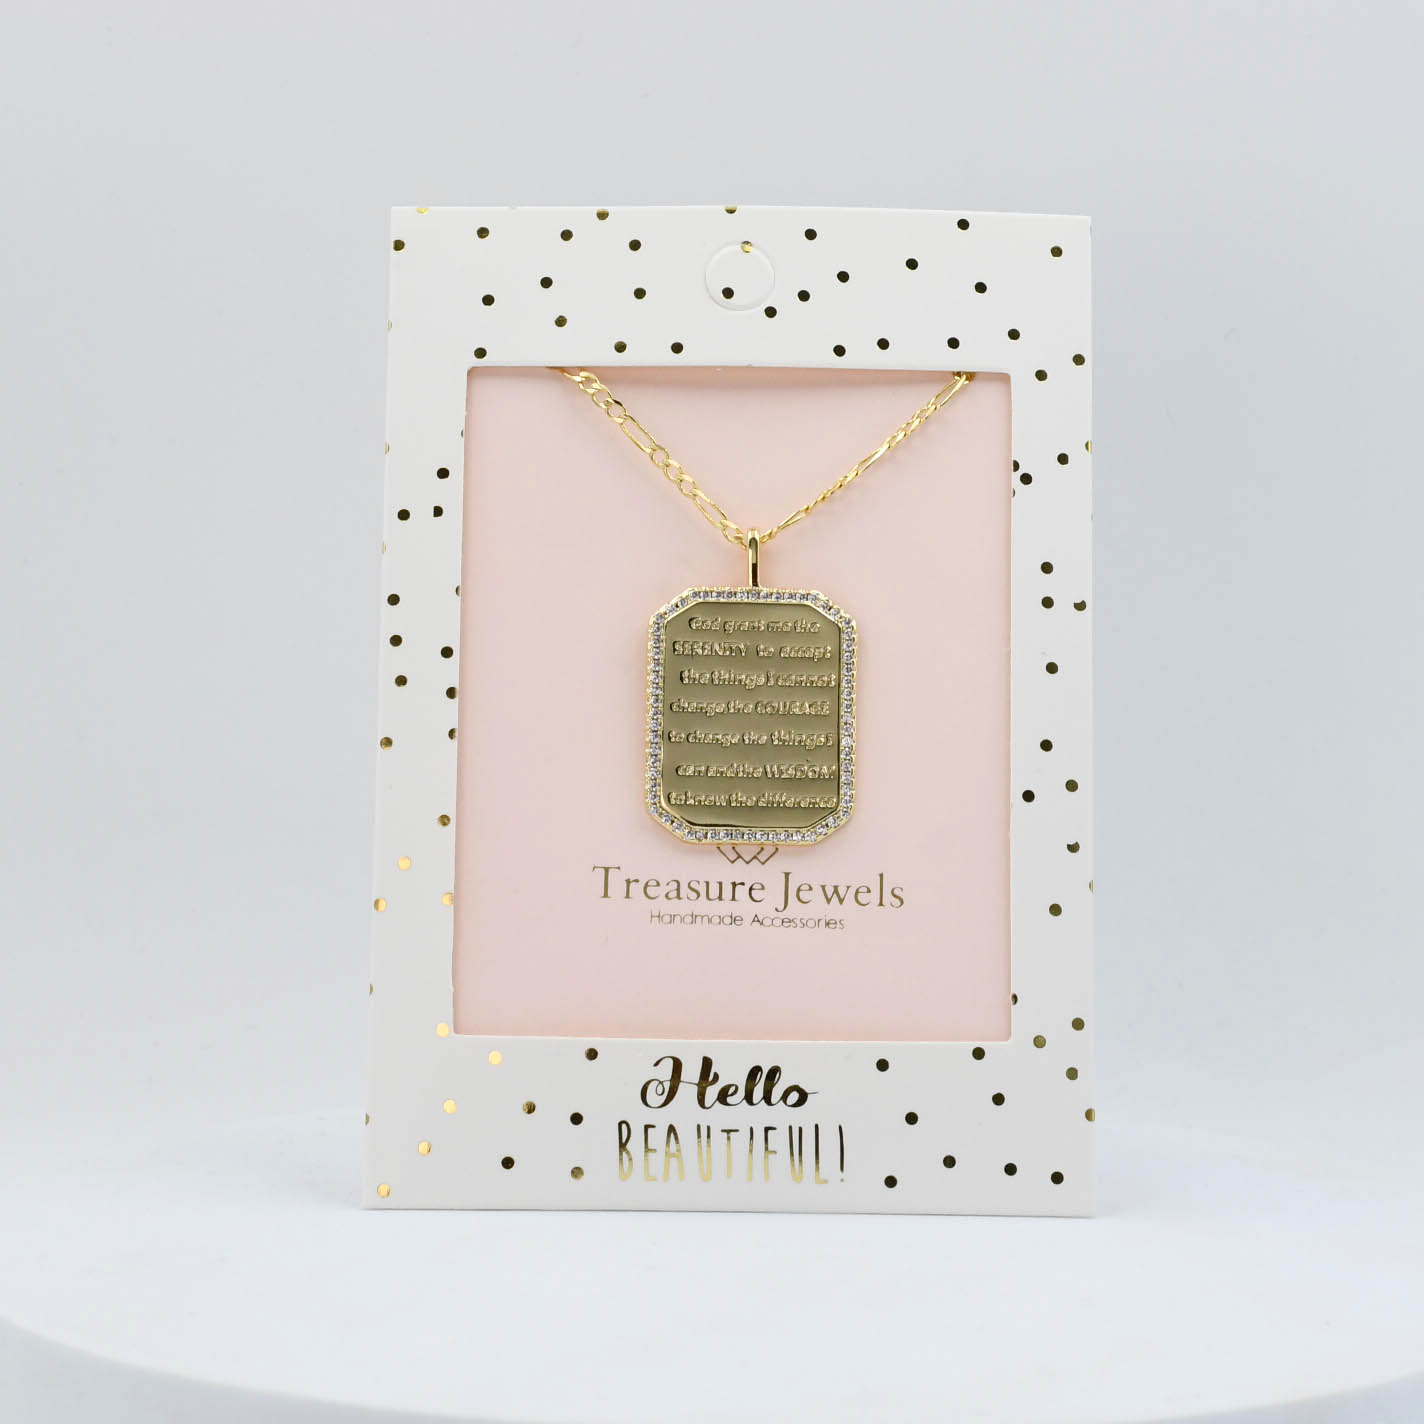 God Grant Me Serenity Necklace